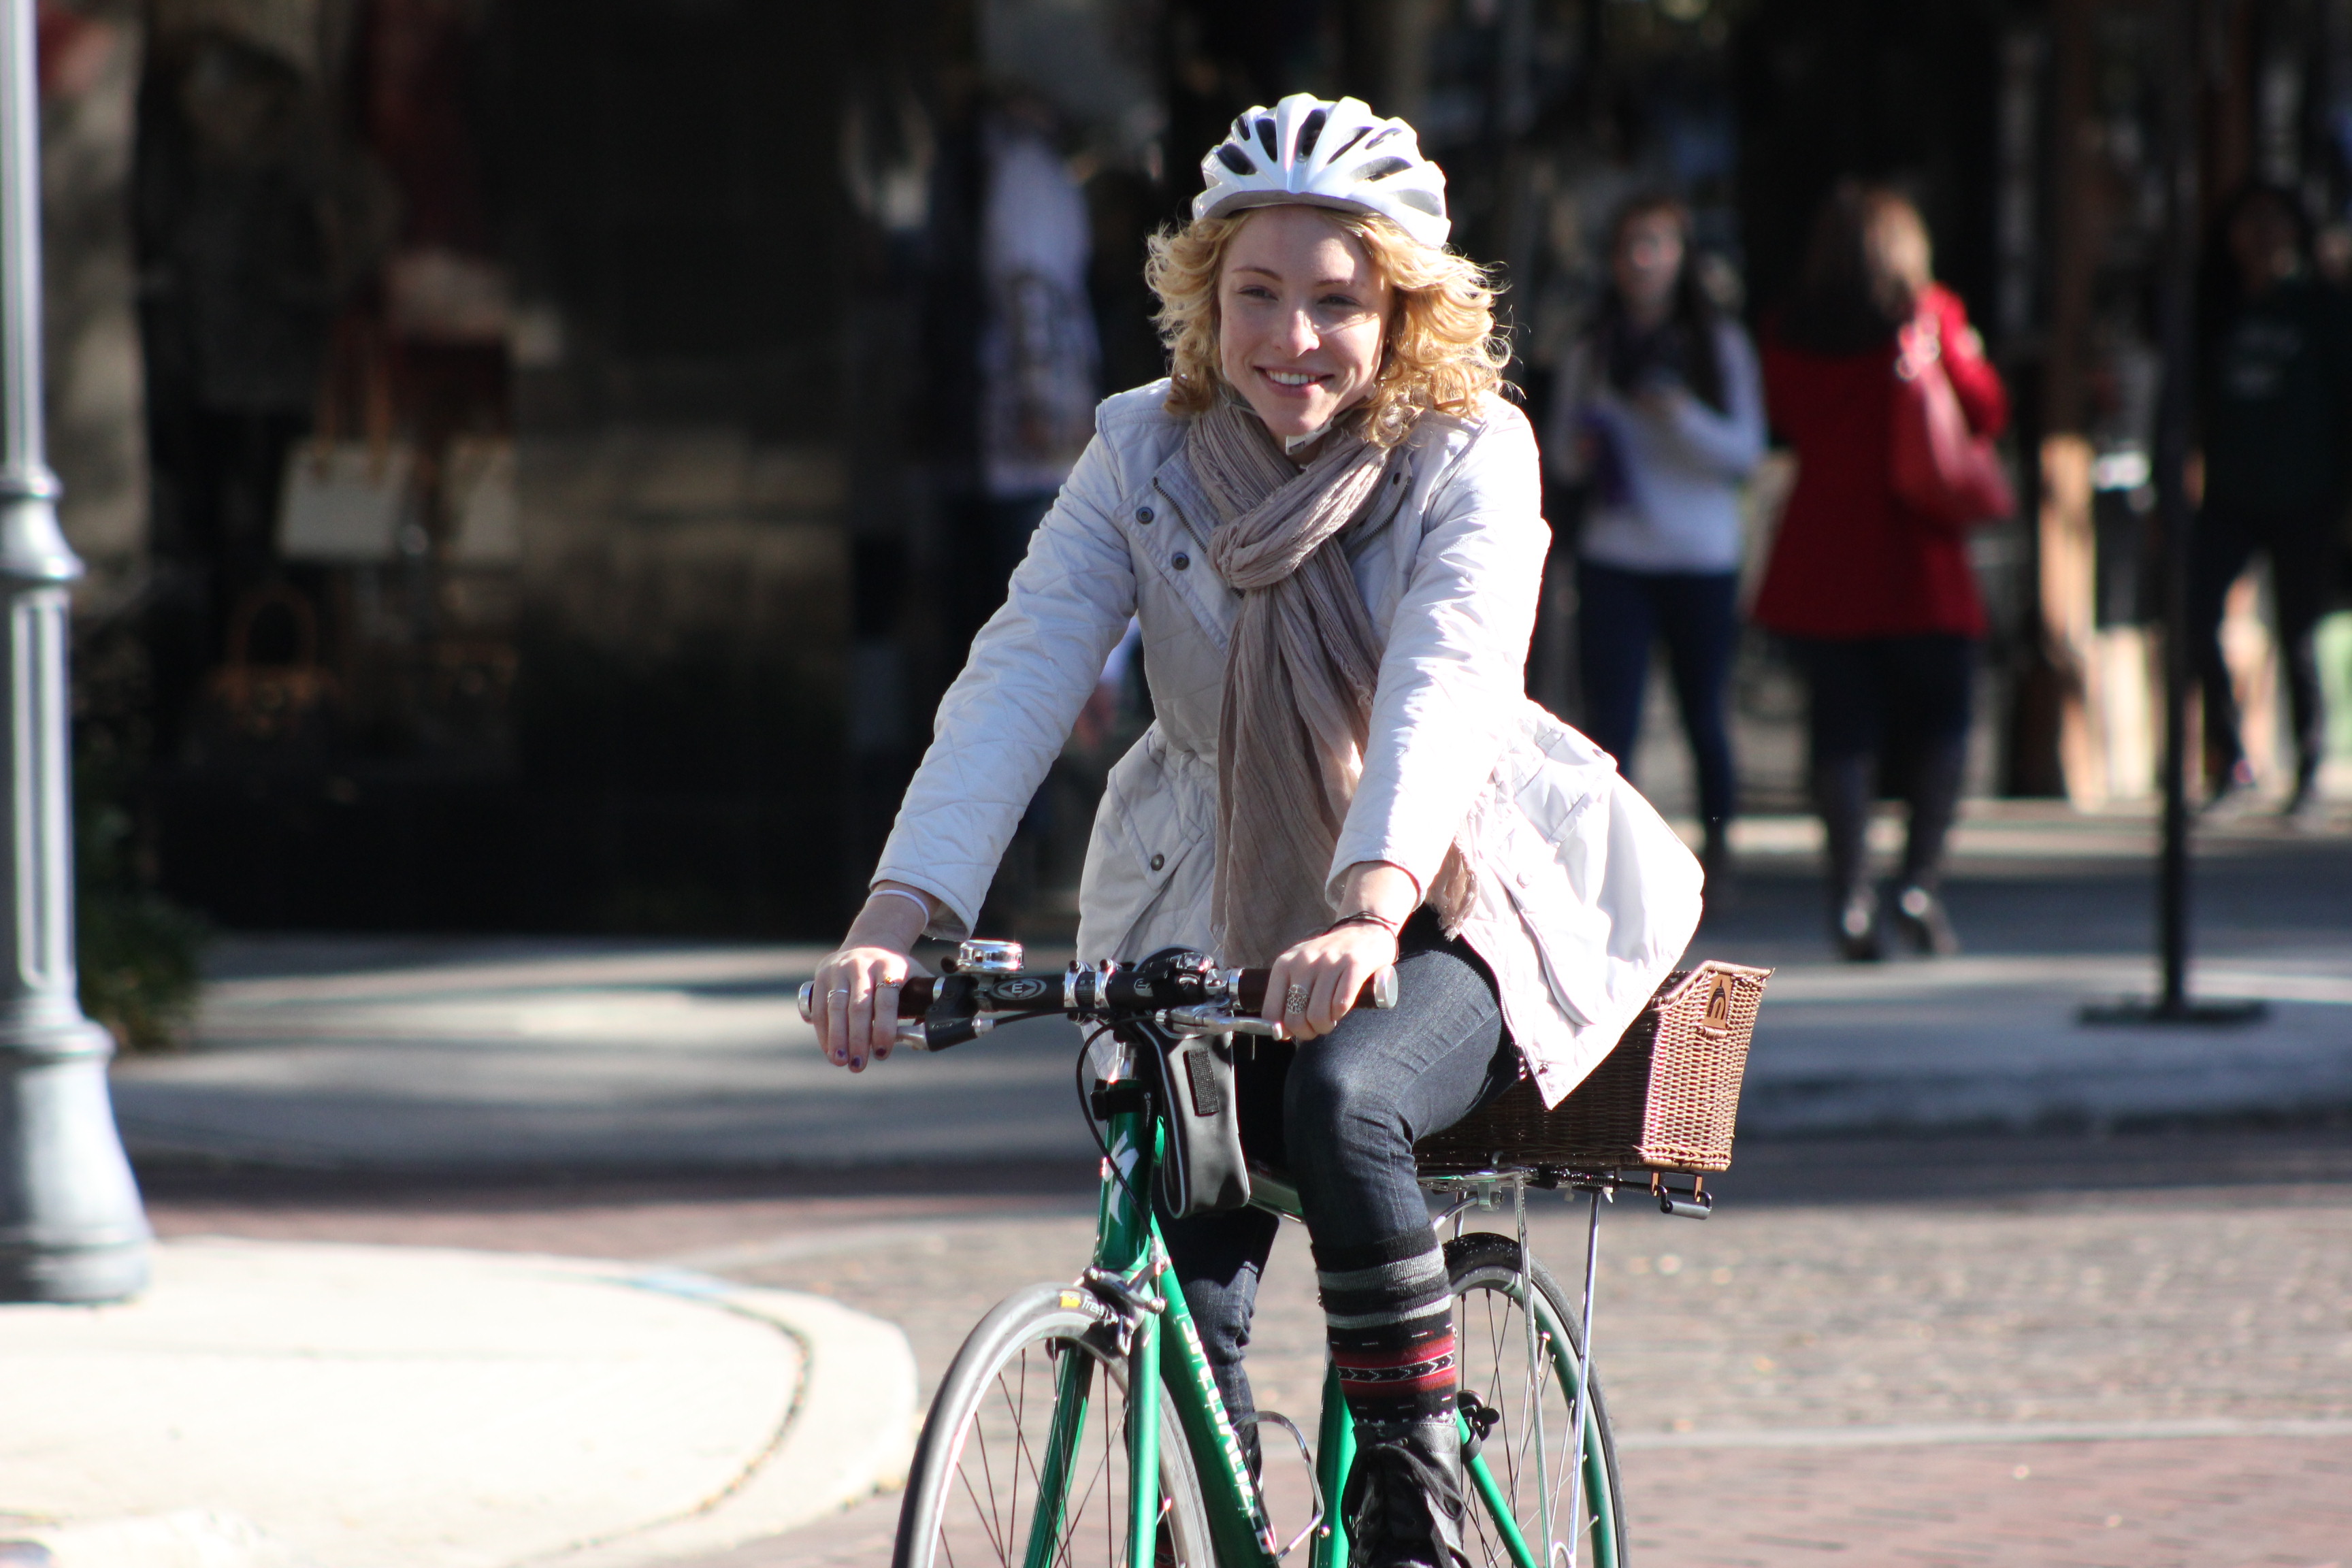 Ride a bike to work, save money and get fit